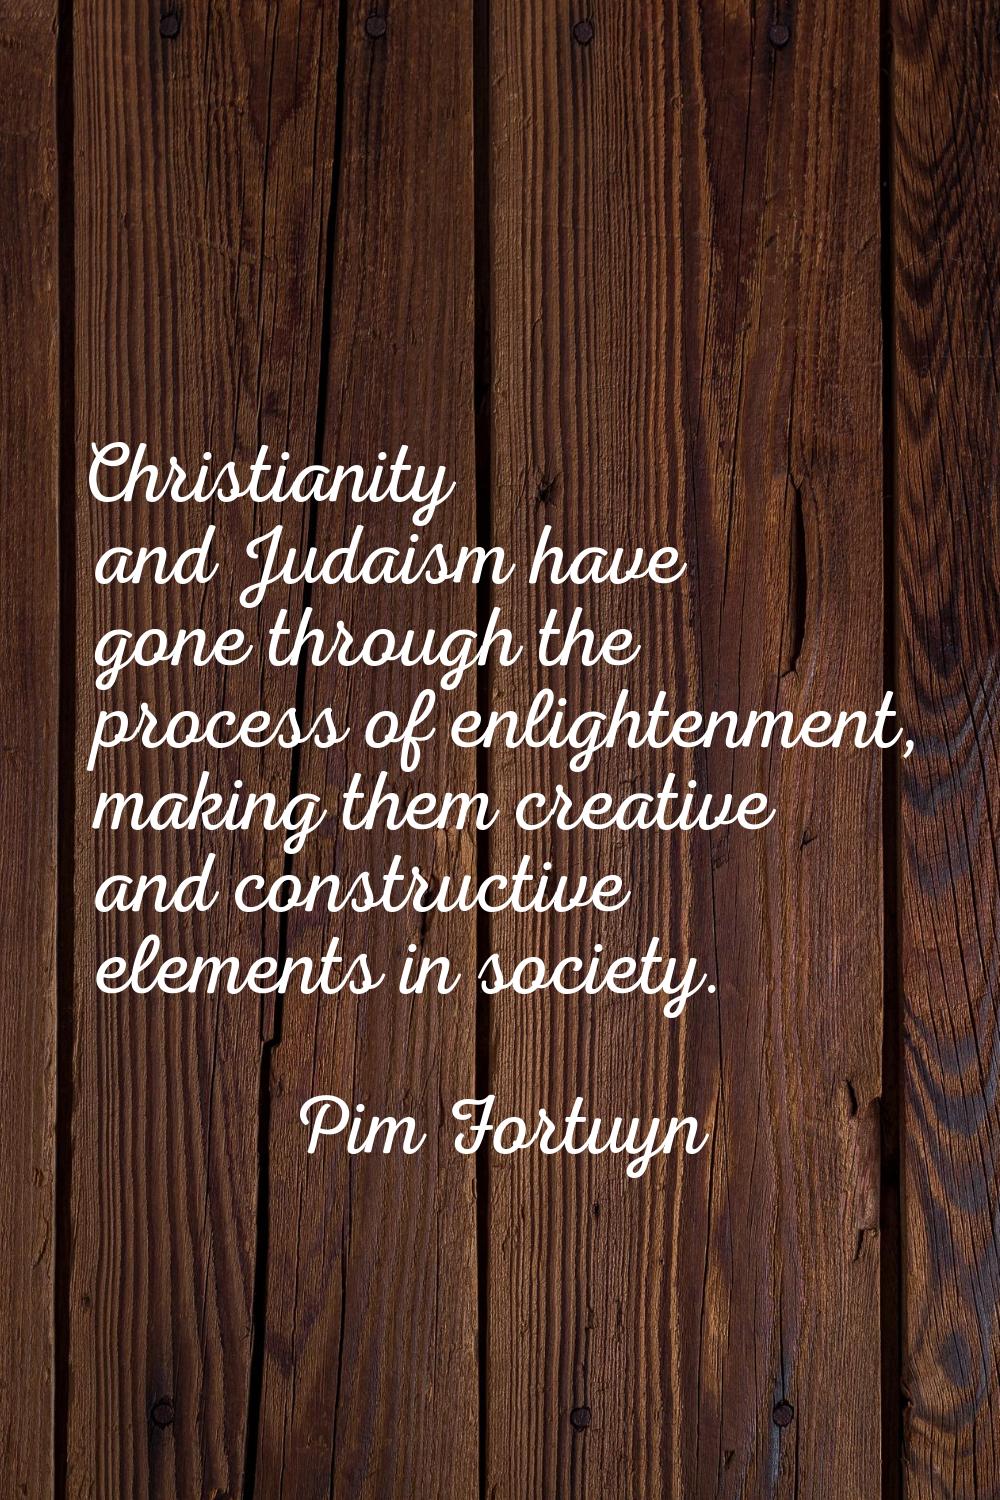 Christianity and Judaism have gone through the process of enlightenment, making them creative and c